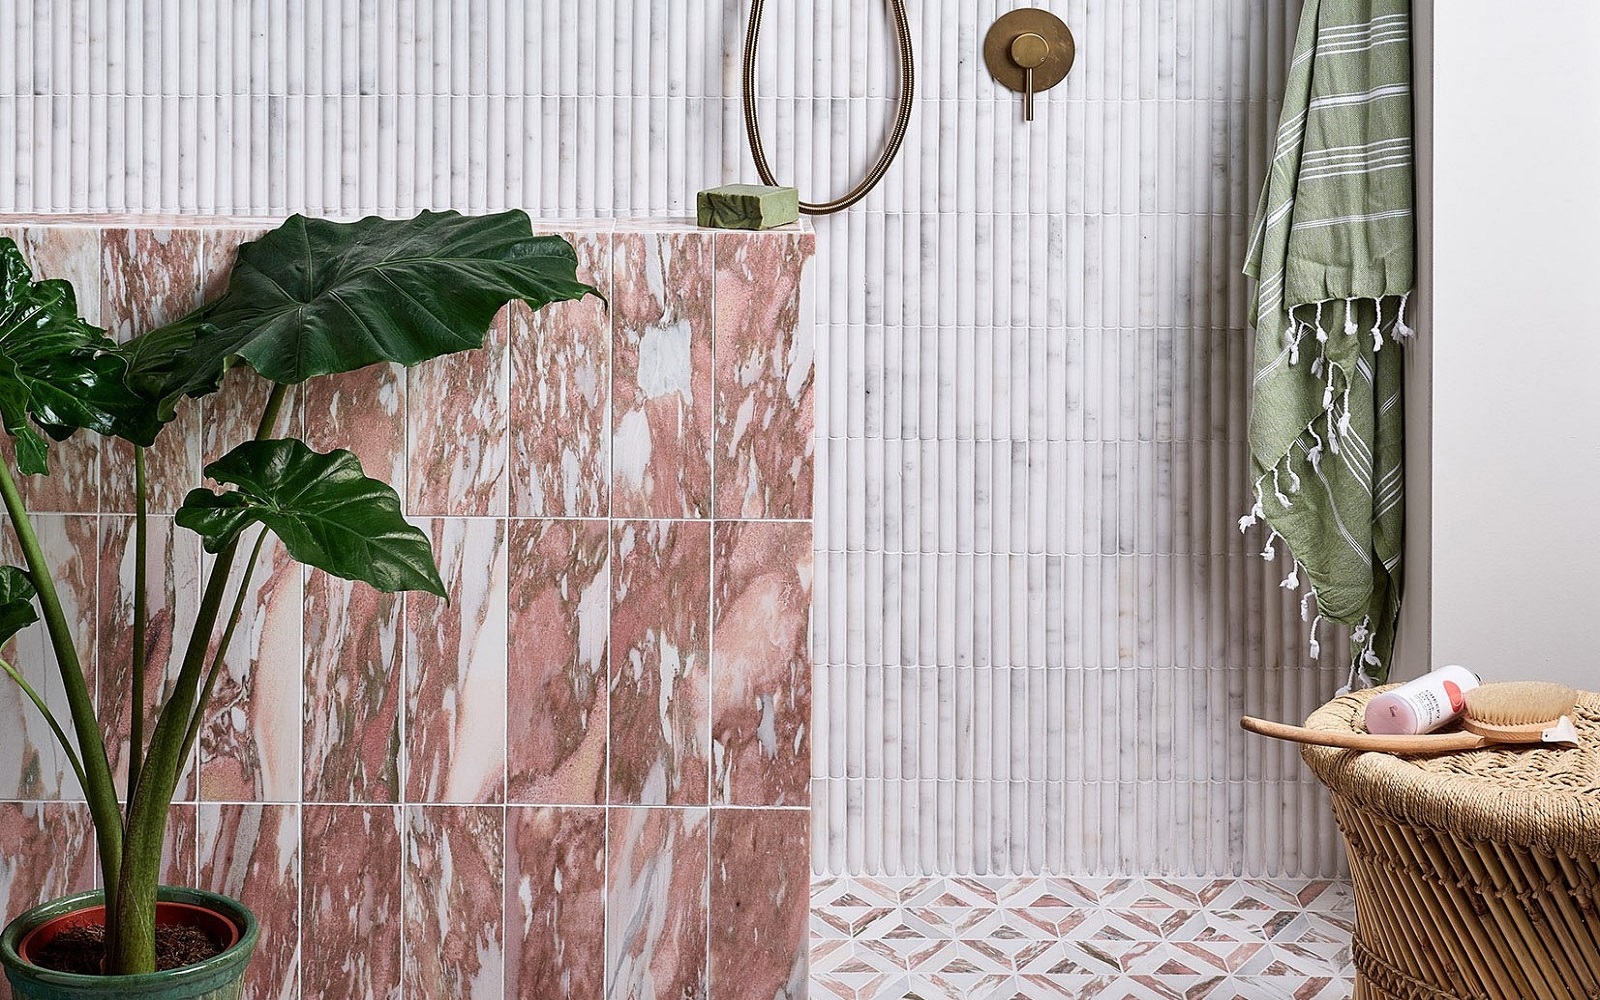 Marvellous marble from Hyperion Tiles • Hotel Designs